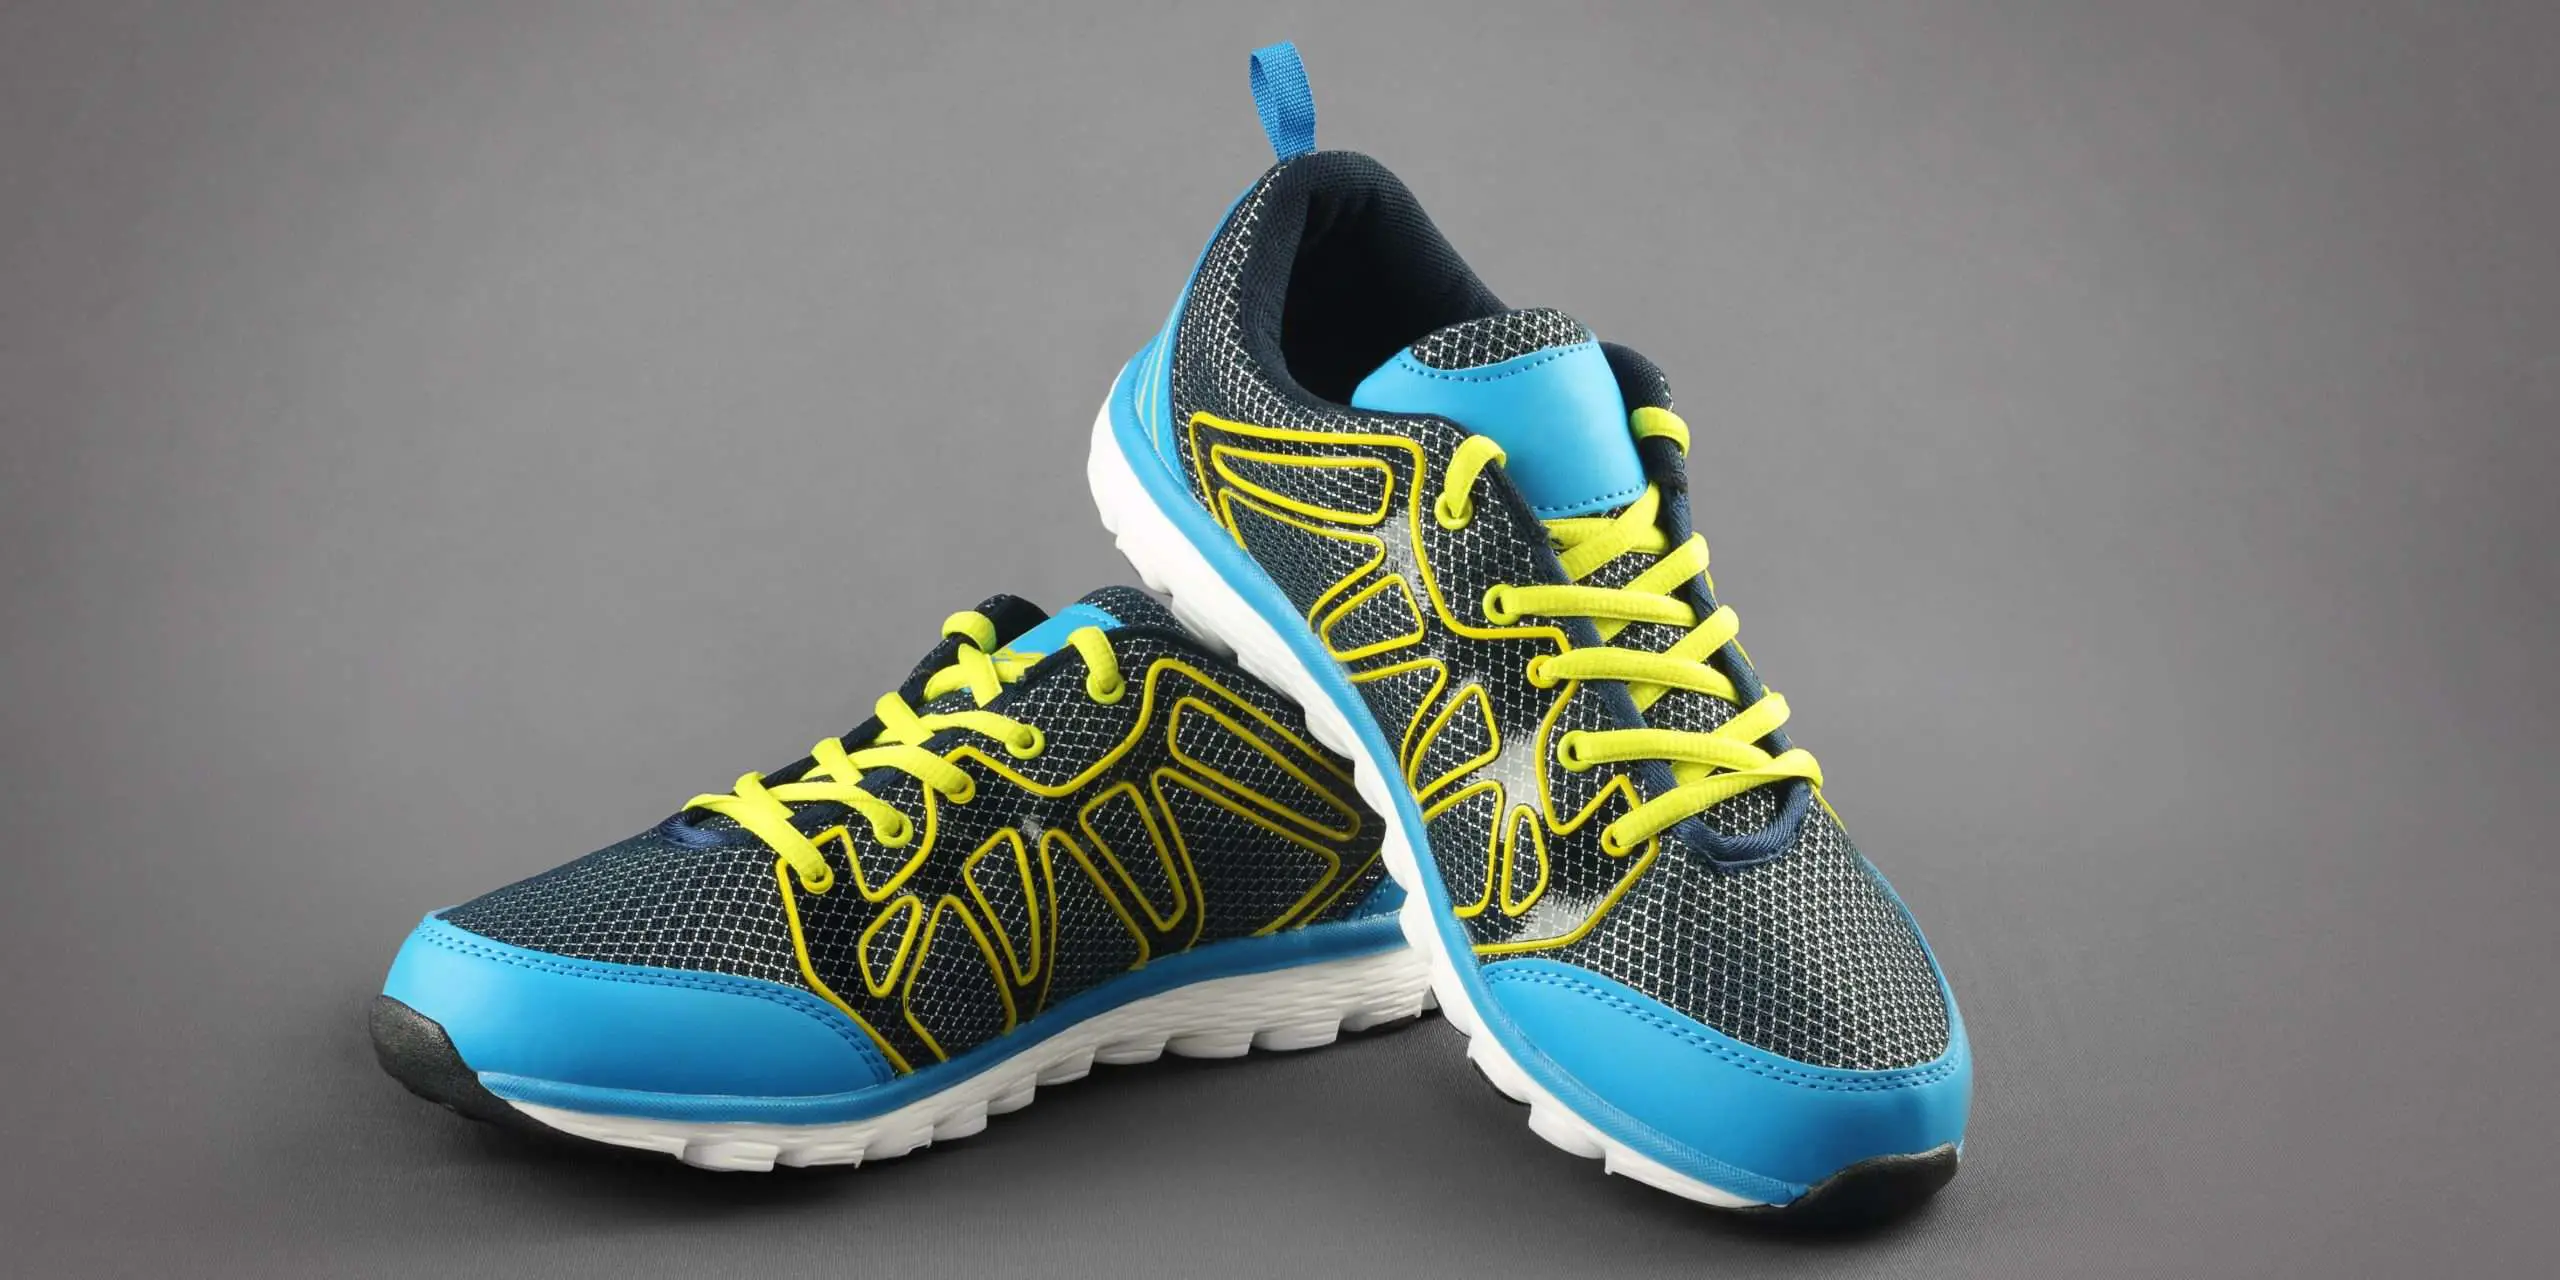 How do you choose the right running shoe?